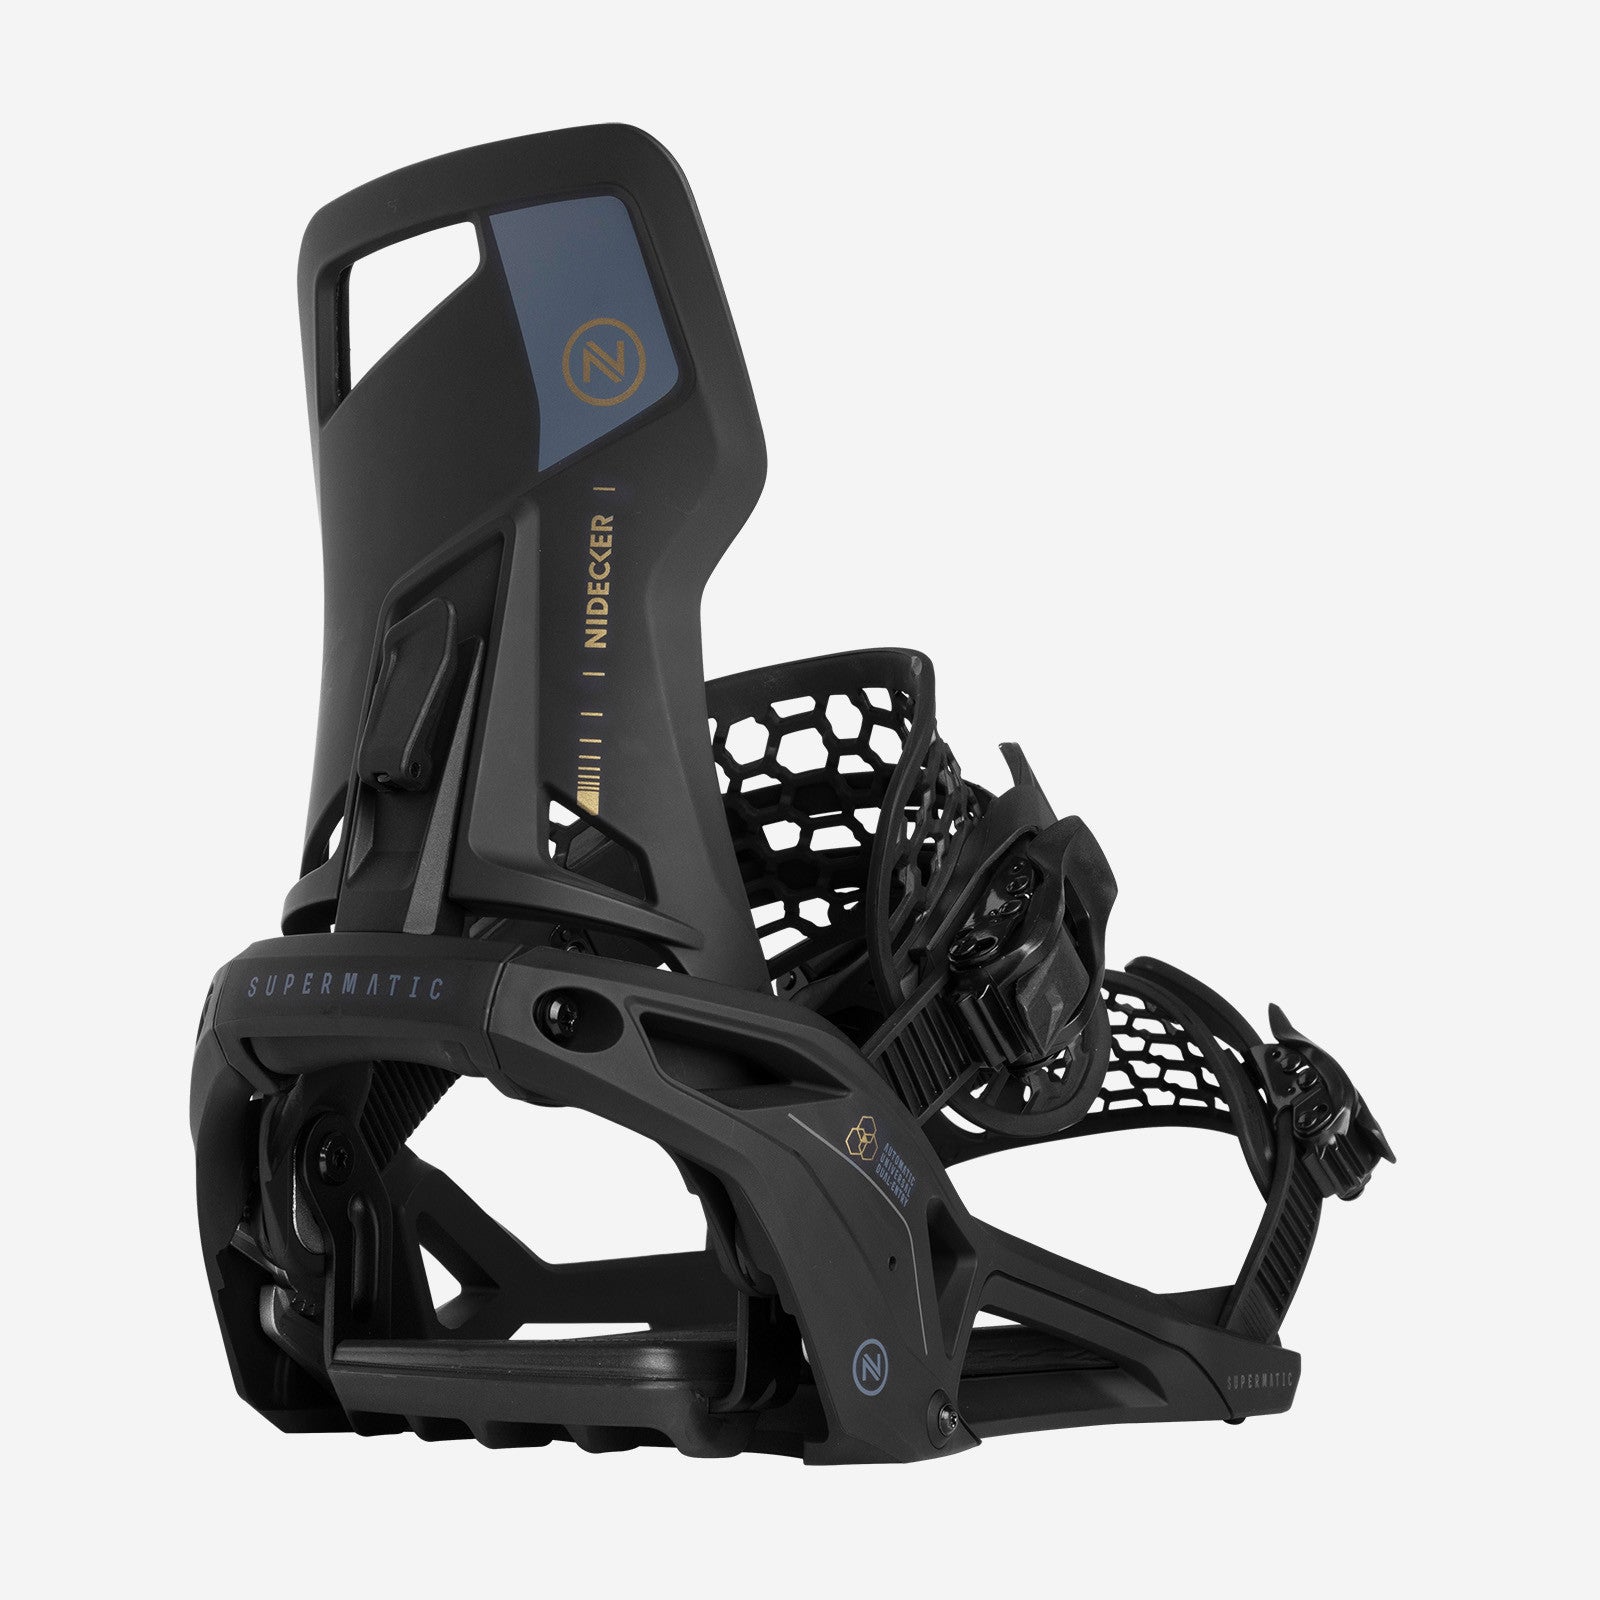 The Nidecker Supermatic is what snowboarding has been waiting for: the first universal, dual-entry, automatic binding. Many brands have tried and failed to crack the step-in code. Most of these systems required specific boots; many didn’t work well in powder; and none of them were as comfortable and reliable as a regular two-strap binding.